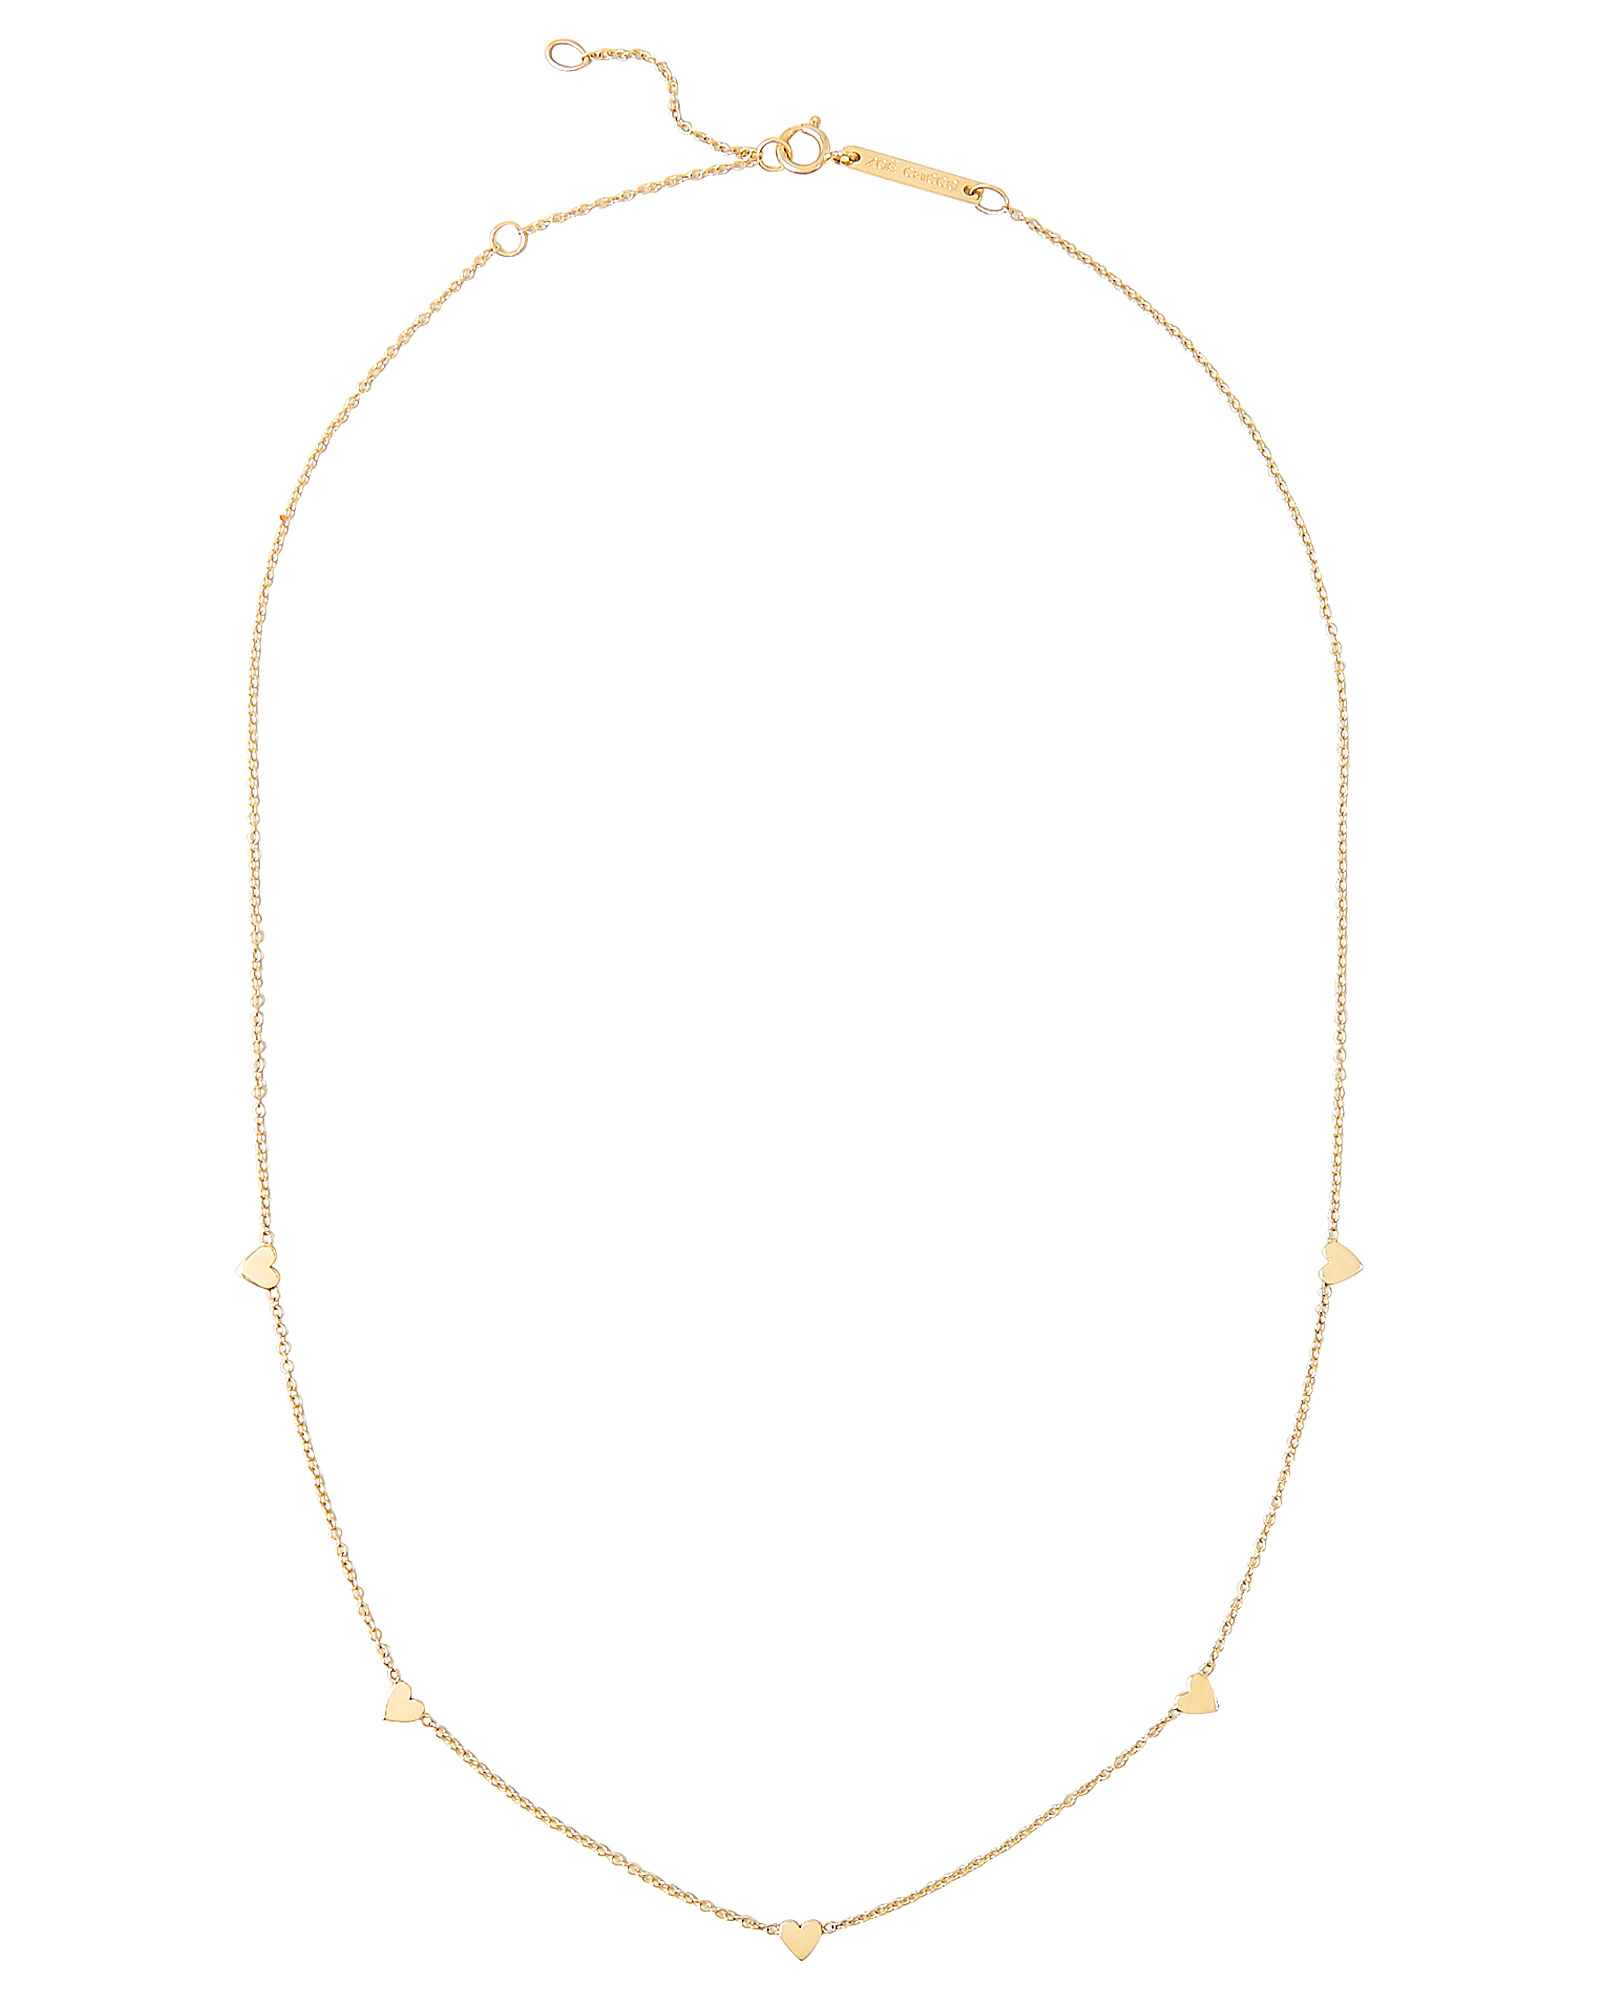 Zoã« Chicco Itty Bitty Symbols Heart Necklace In Gold